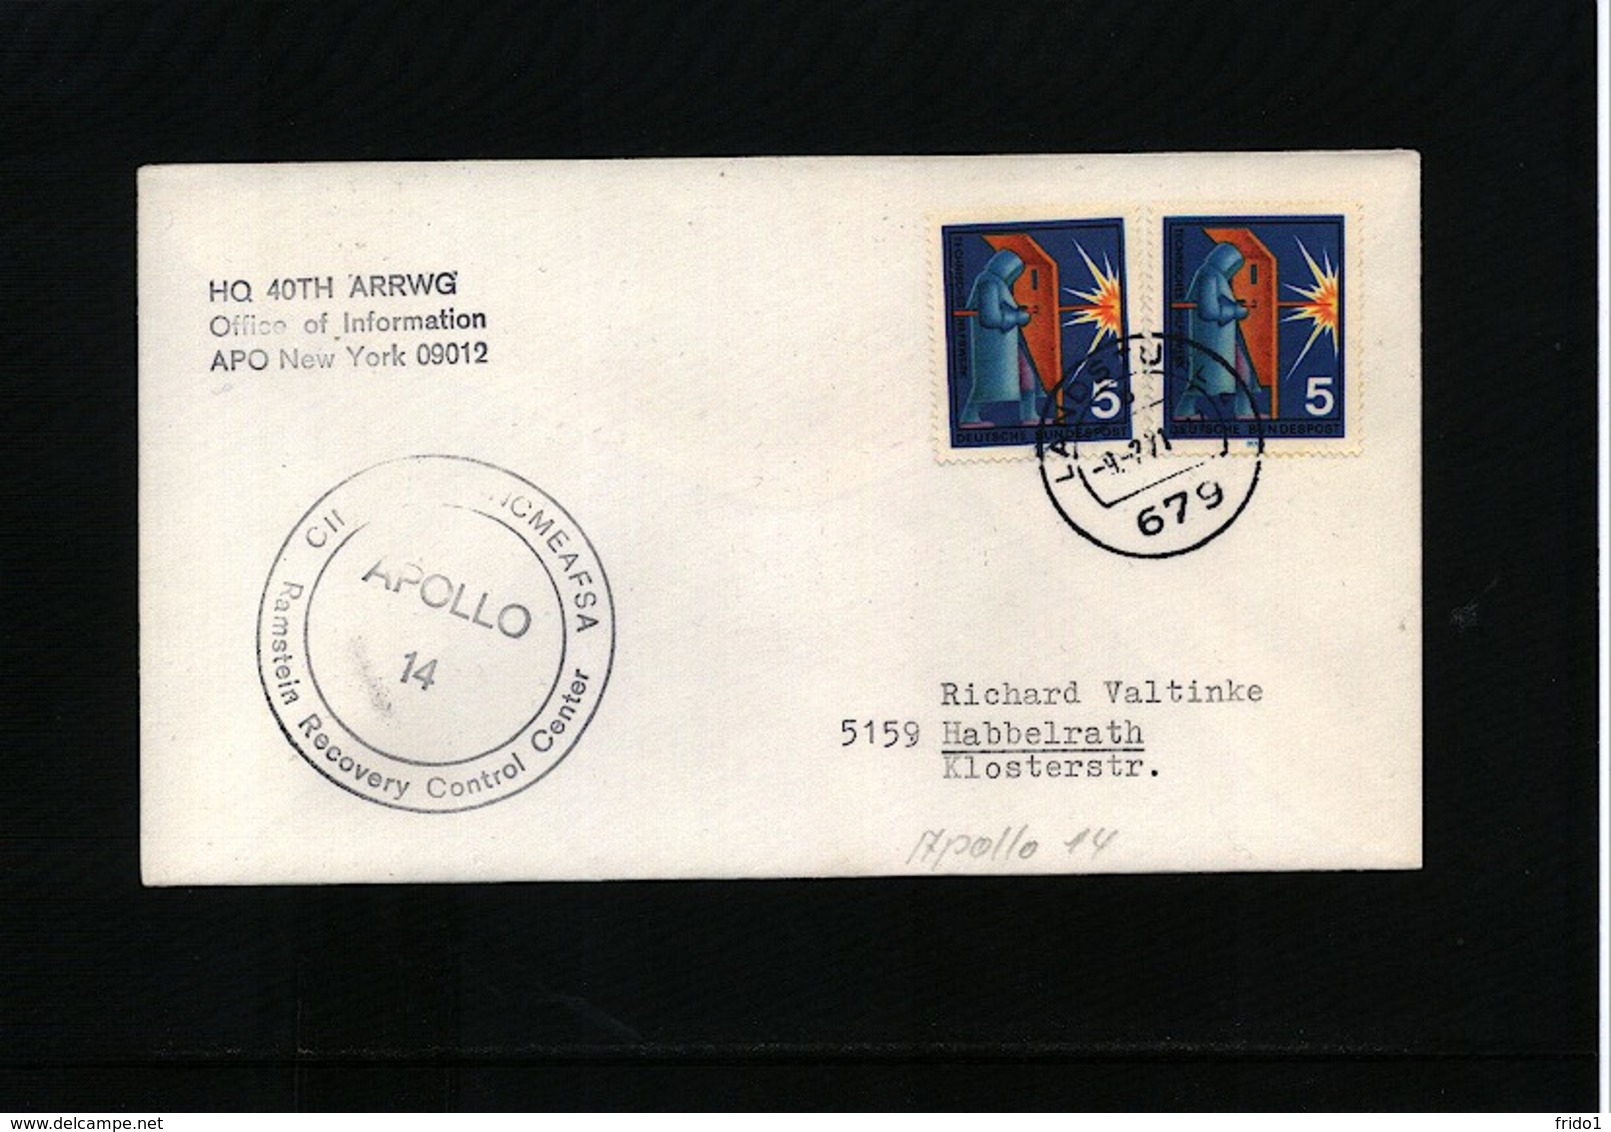 Germany / Deutschland 1971 Space / Raumfahrt Apollo 14 Ramstein Recovery Control Center Interesting Cover - Europe